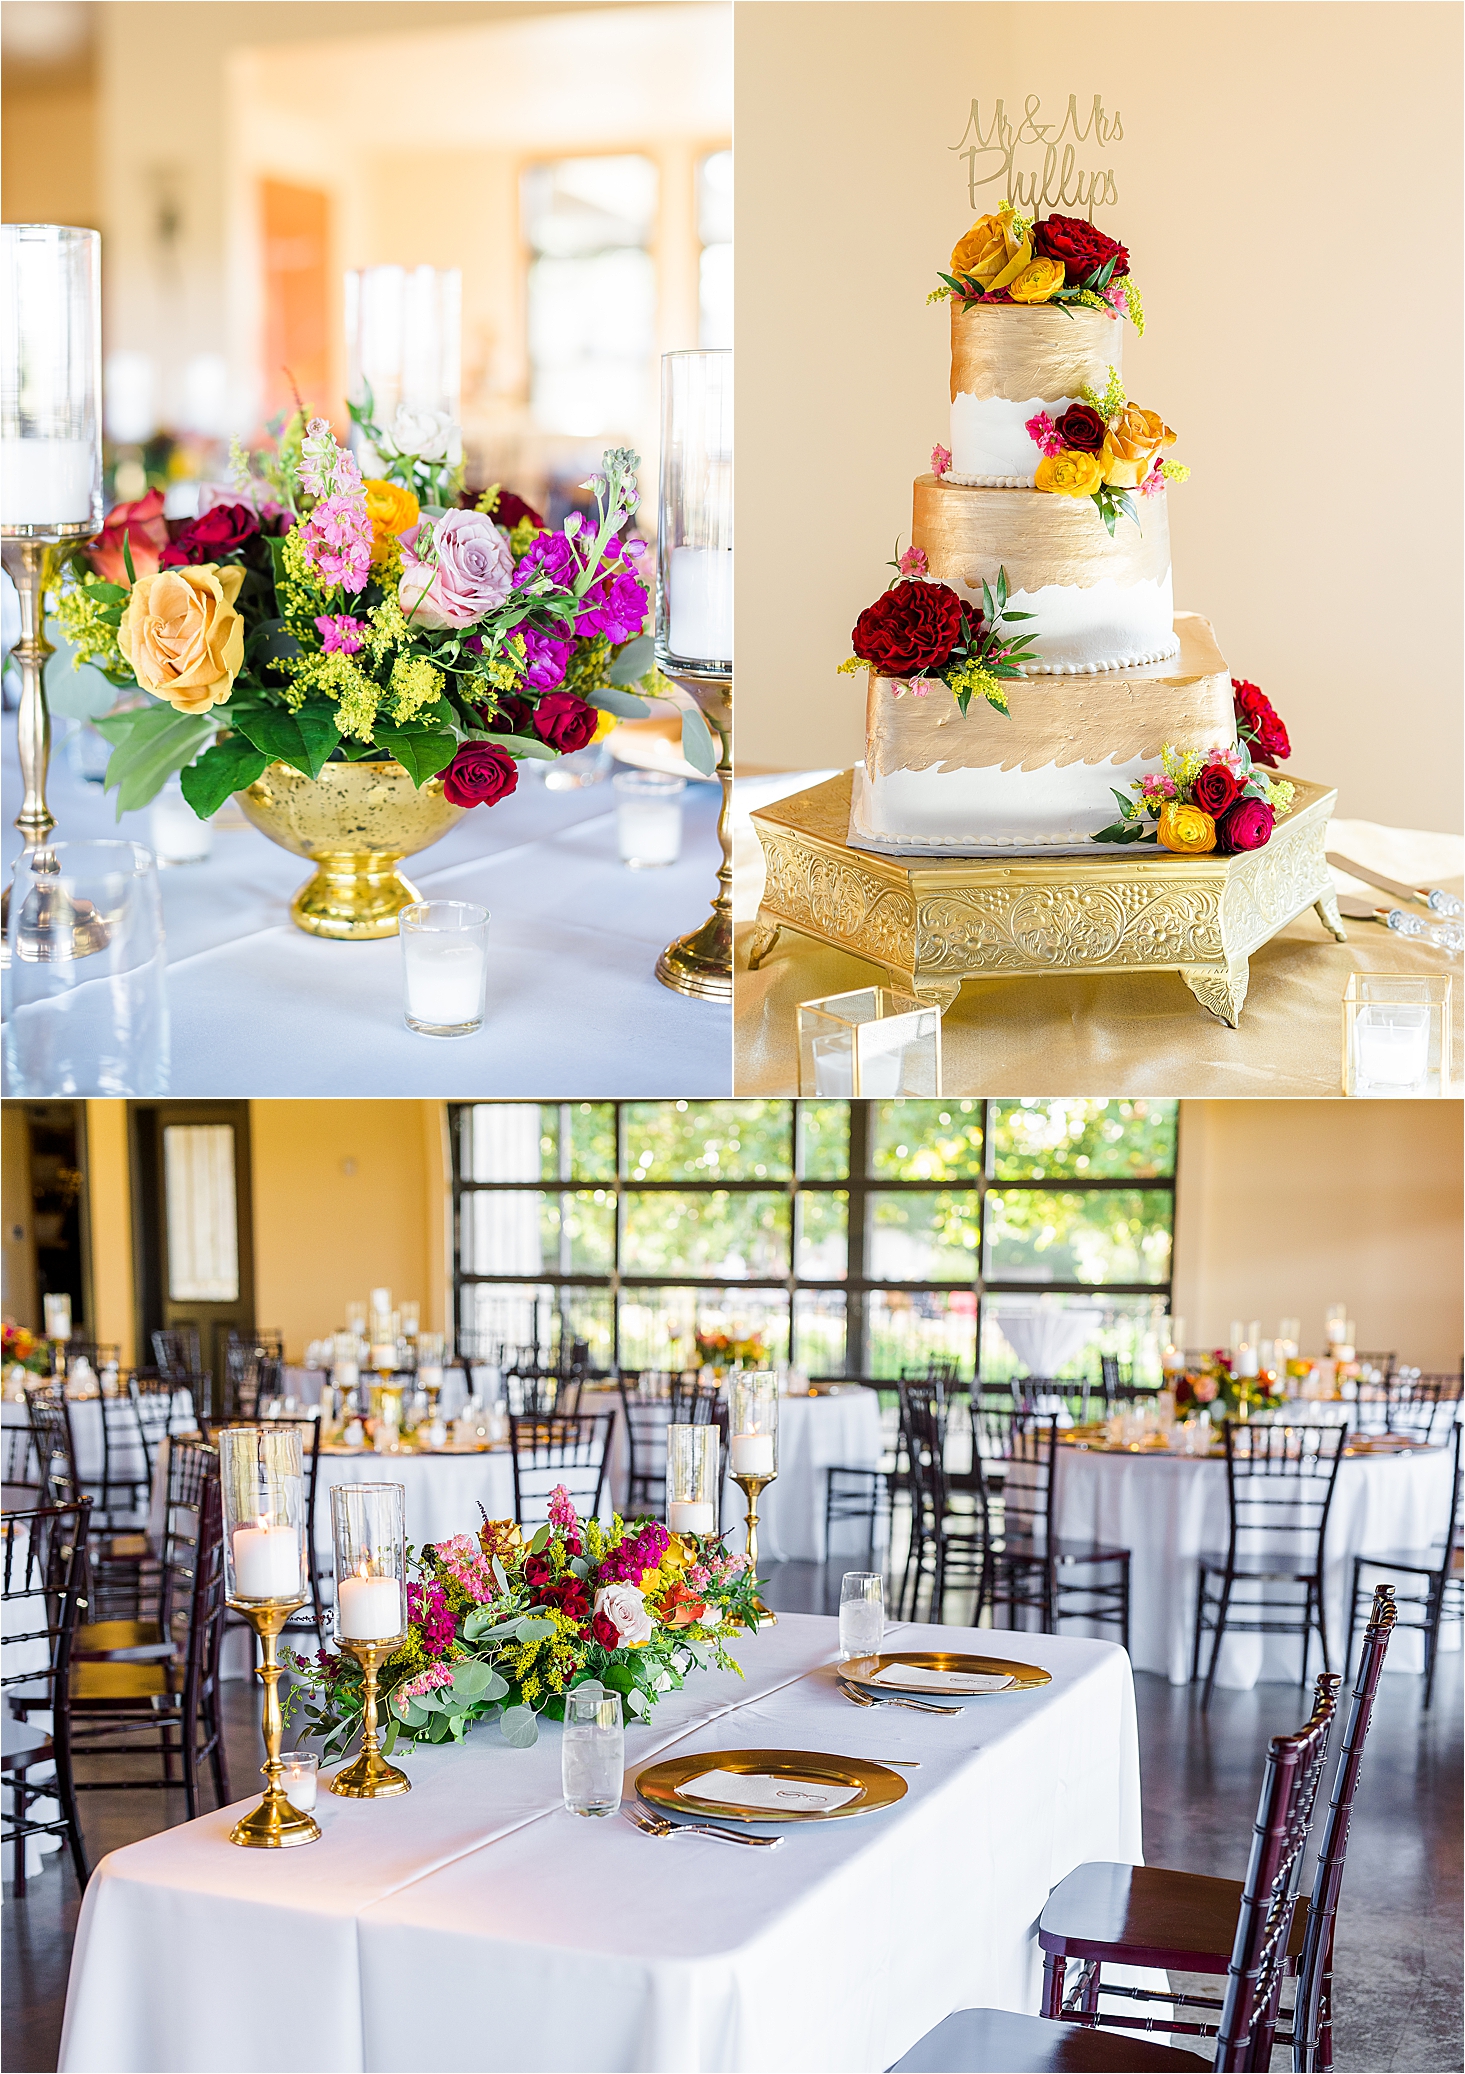 A wedding cake and decorated reception at Paniolo Ranch in Boerne, Texas